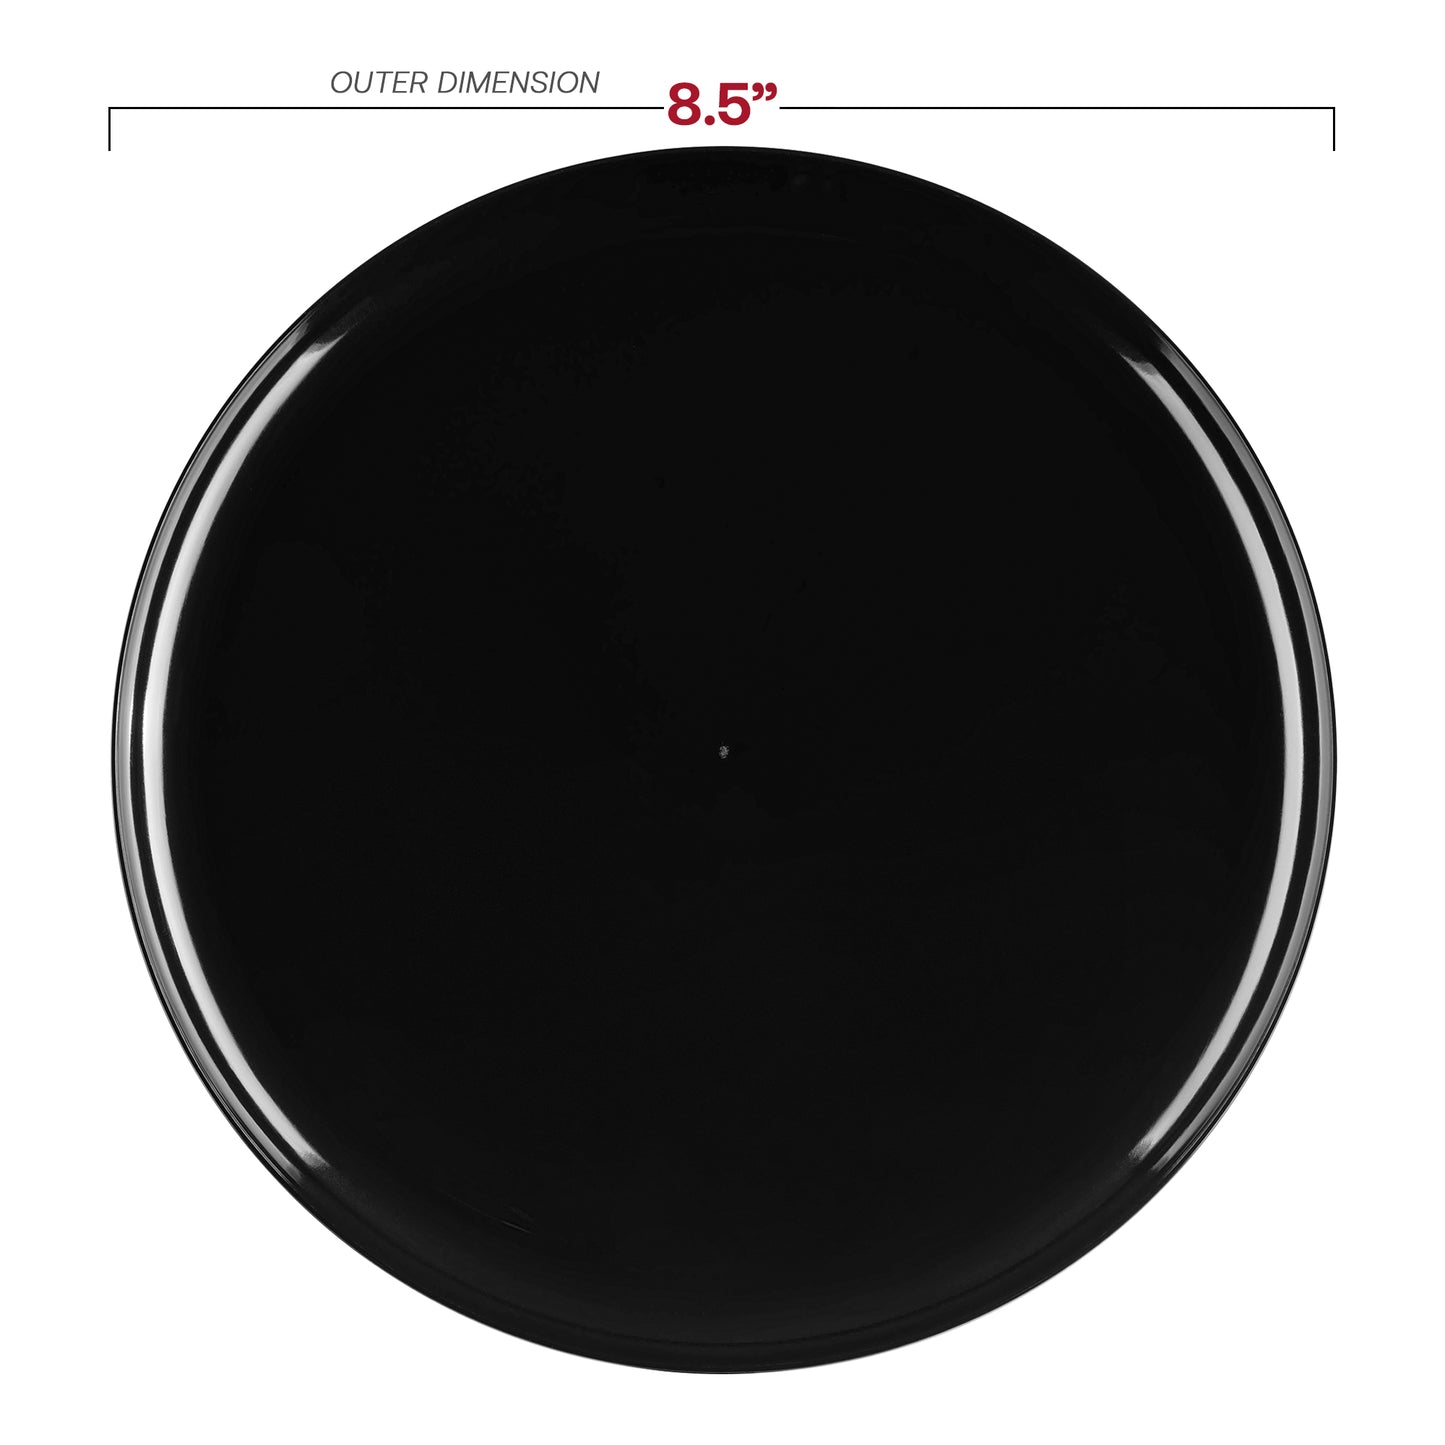 Black Flat Round Disposable Plastic Appetizer/Salad Plates (8.5") Dimension | The Kaya Collection